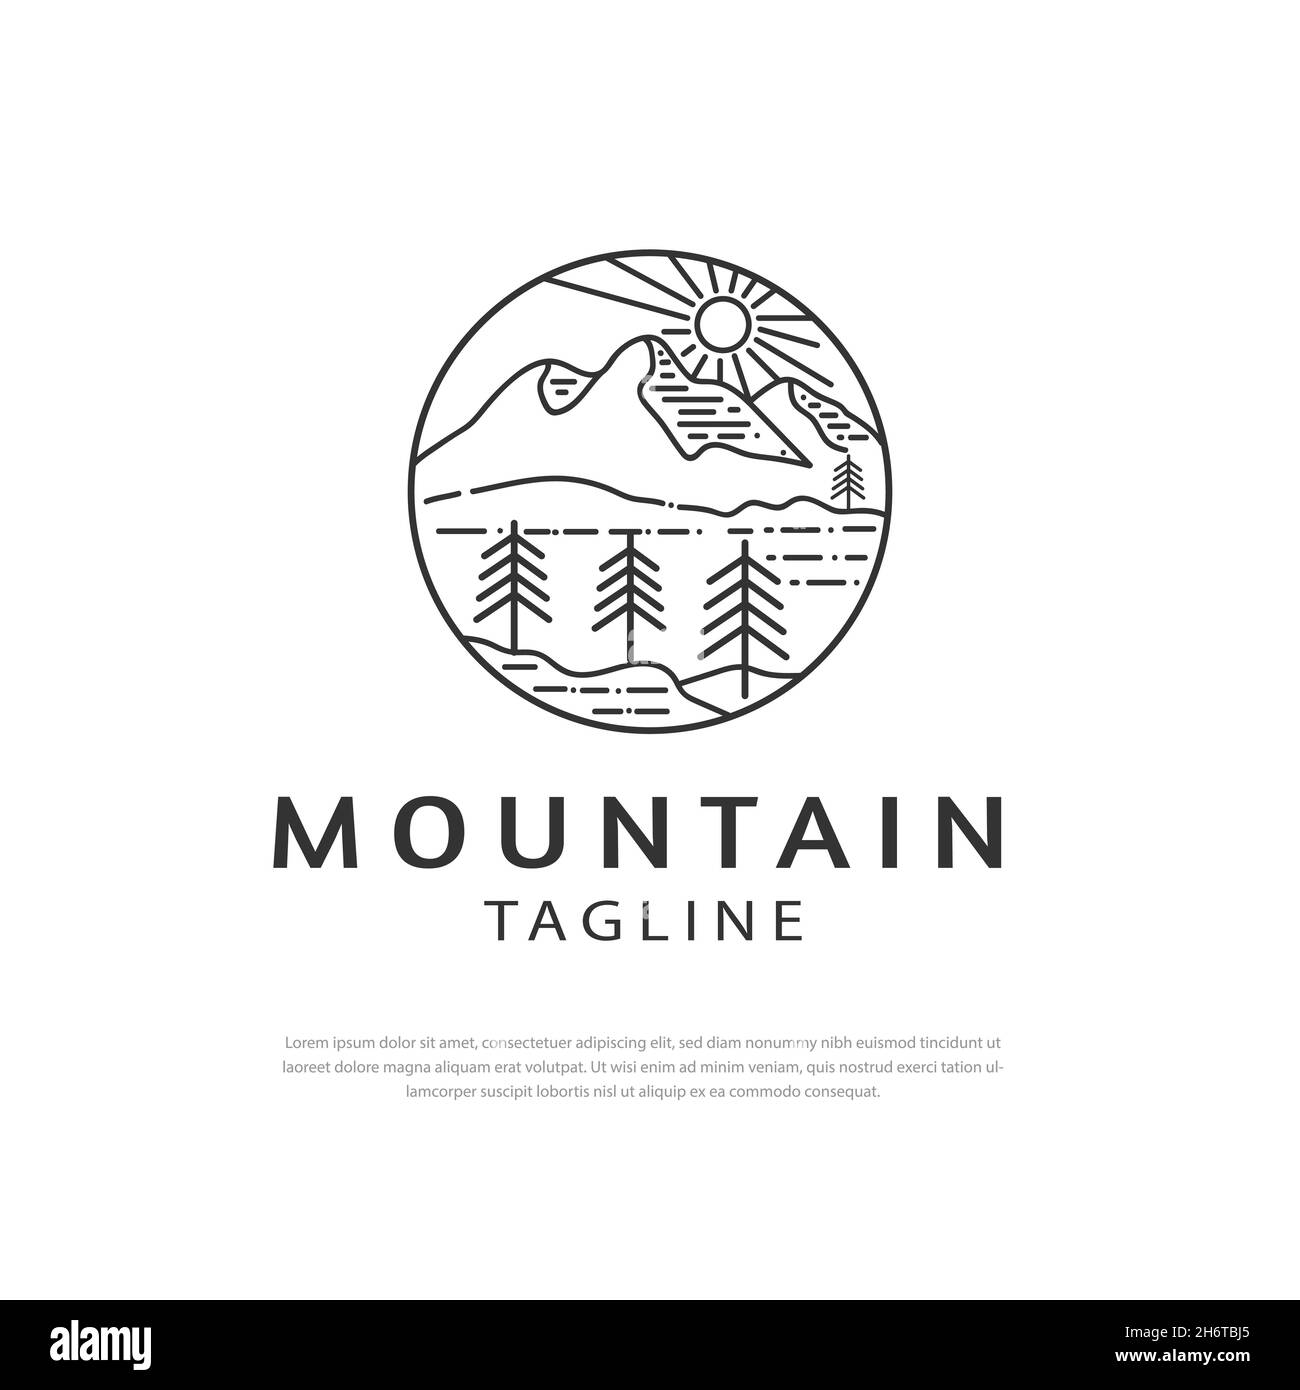 Mountains logo in simple line style.sun,trees,river,sky,vector illustration on white background,camping,mountains travel logo design Stock Vector